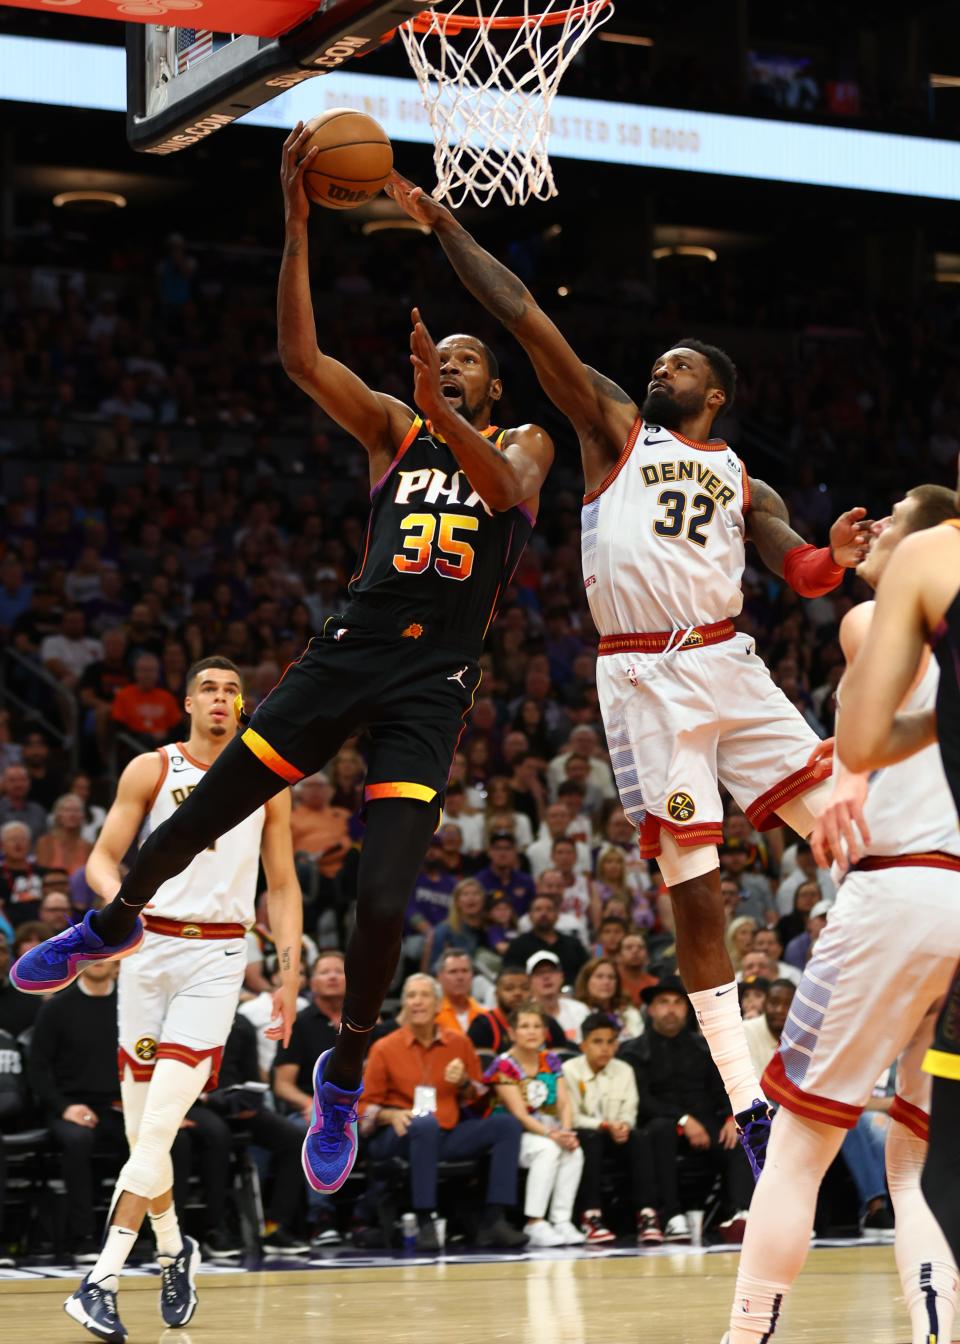 May 5, 2023; Phoenix, Arizona, USA; Phoenix Suns forward Kevin Durant (35) drives to the basket against Denver Nuggets forward Jeff Green (32) in the first half during game three of the 2023 NBA playoffs at Footprint Center. Mandatory Credit: Mark J. Rebilas-USA TODAY Sports